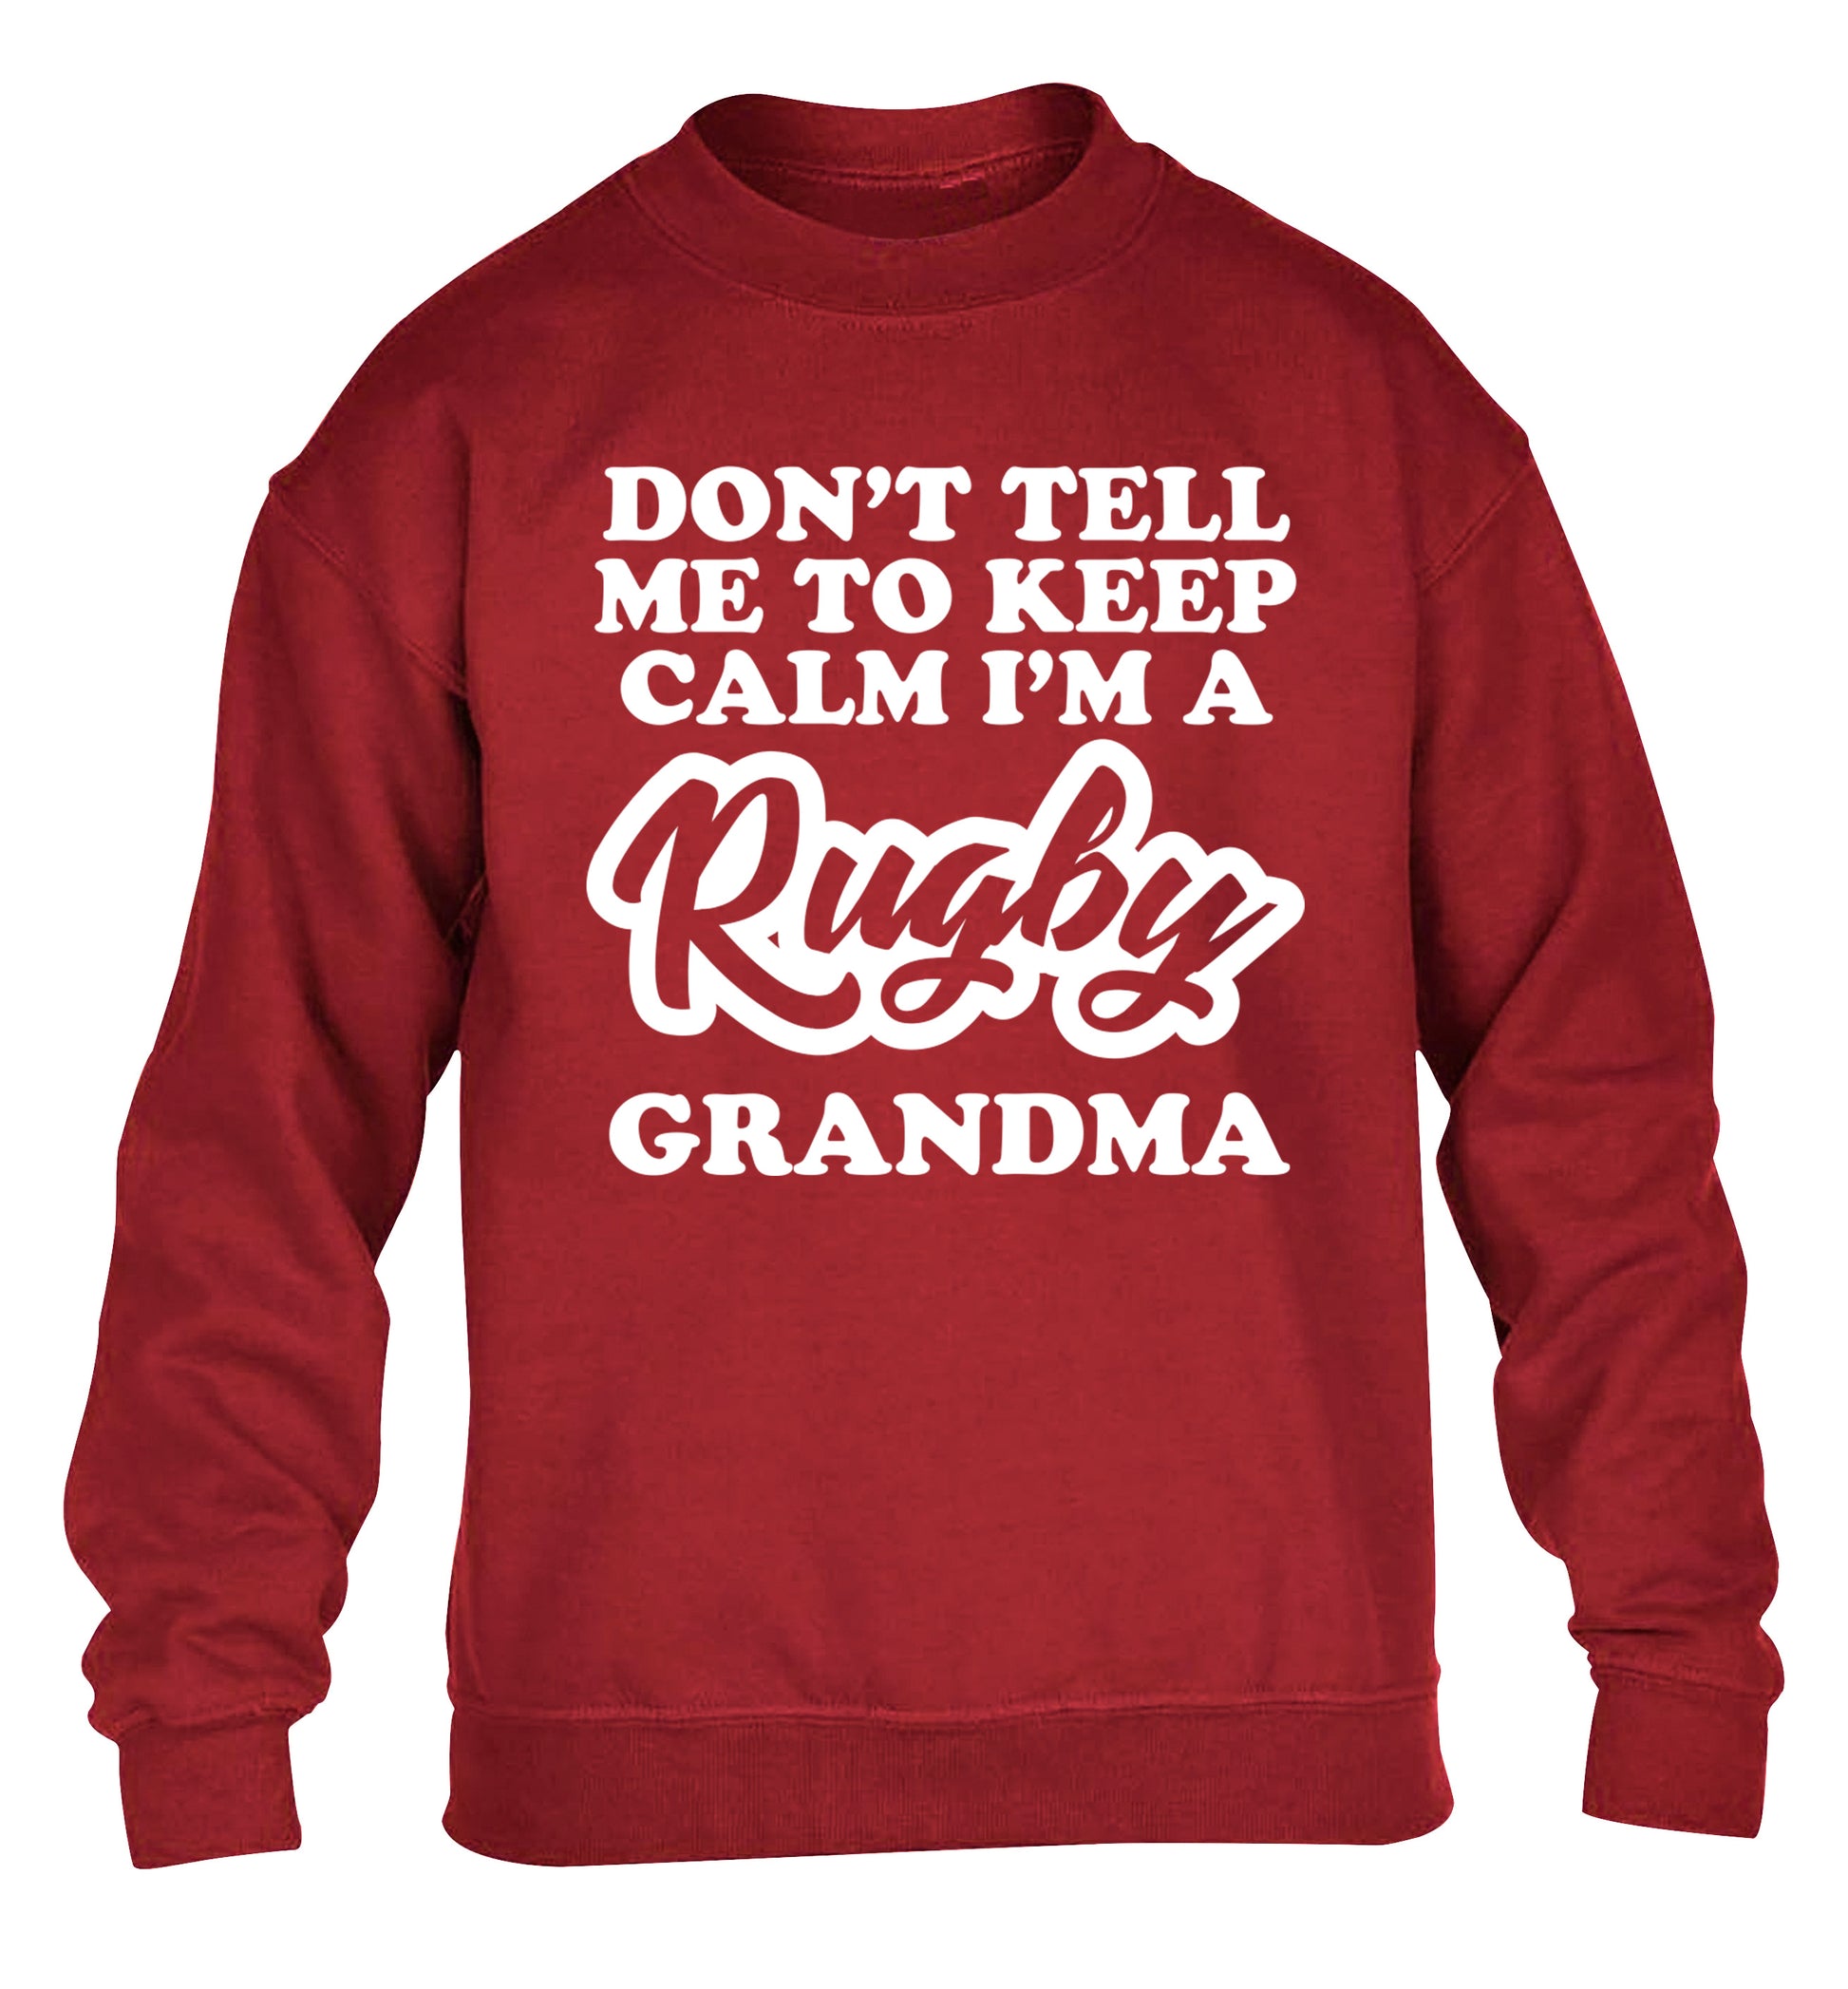 Don't tell me to keep calm I'm a rugby grandma children's grey sweater 12-13 Years